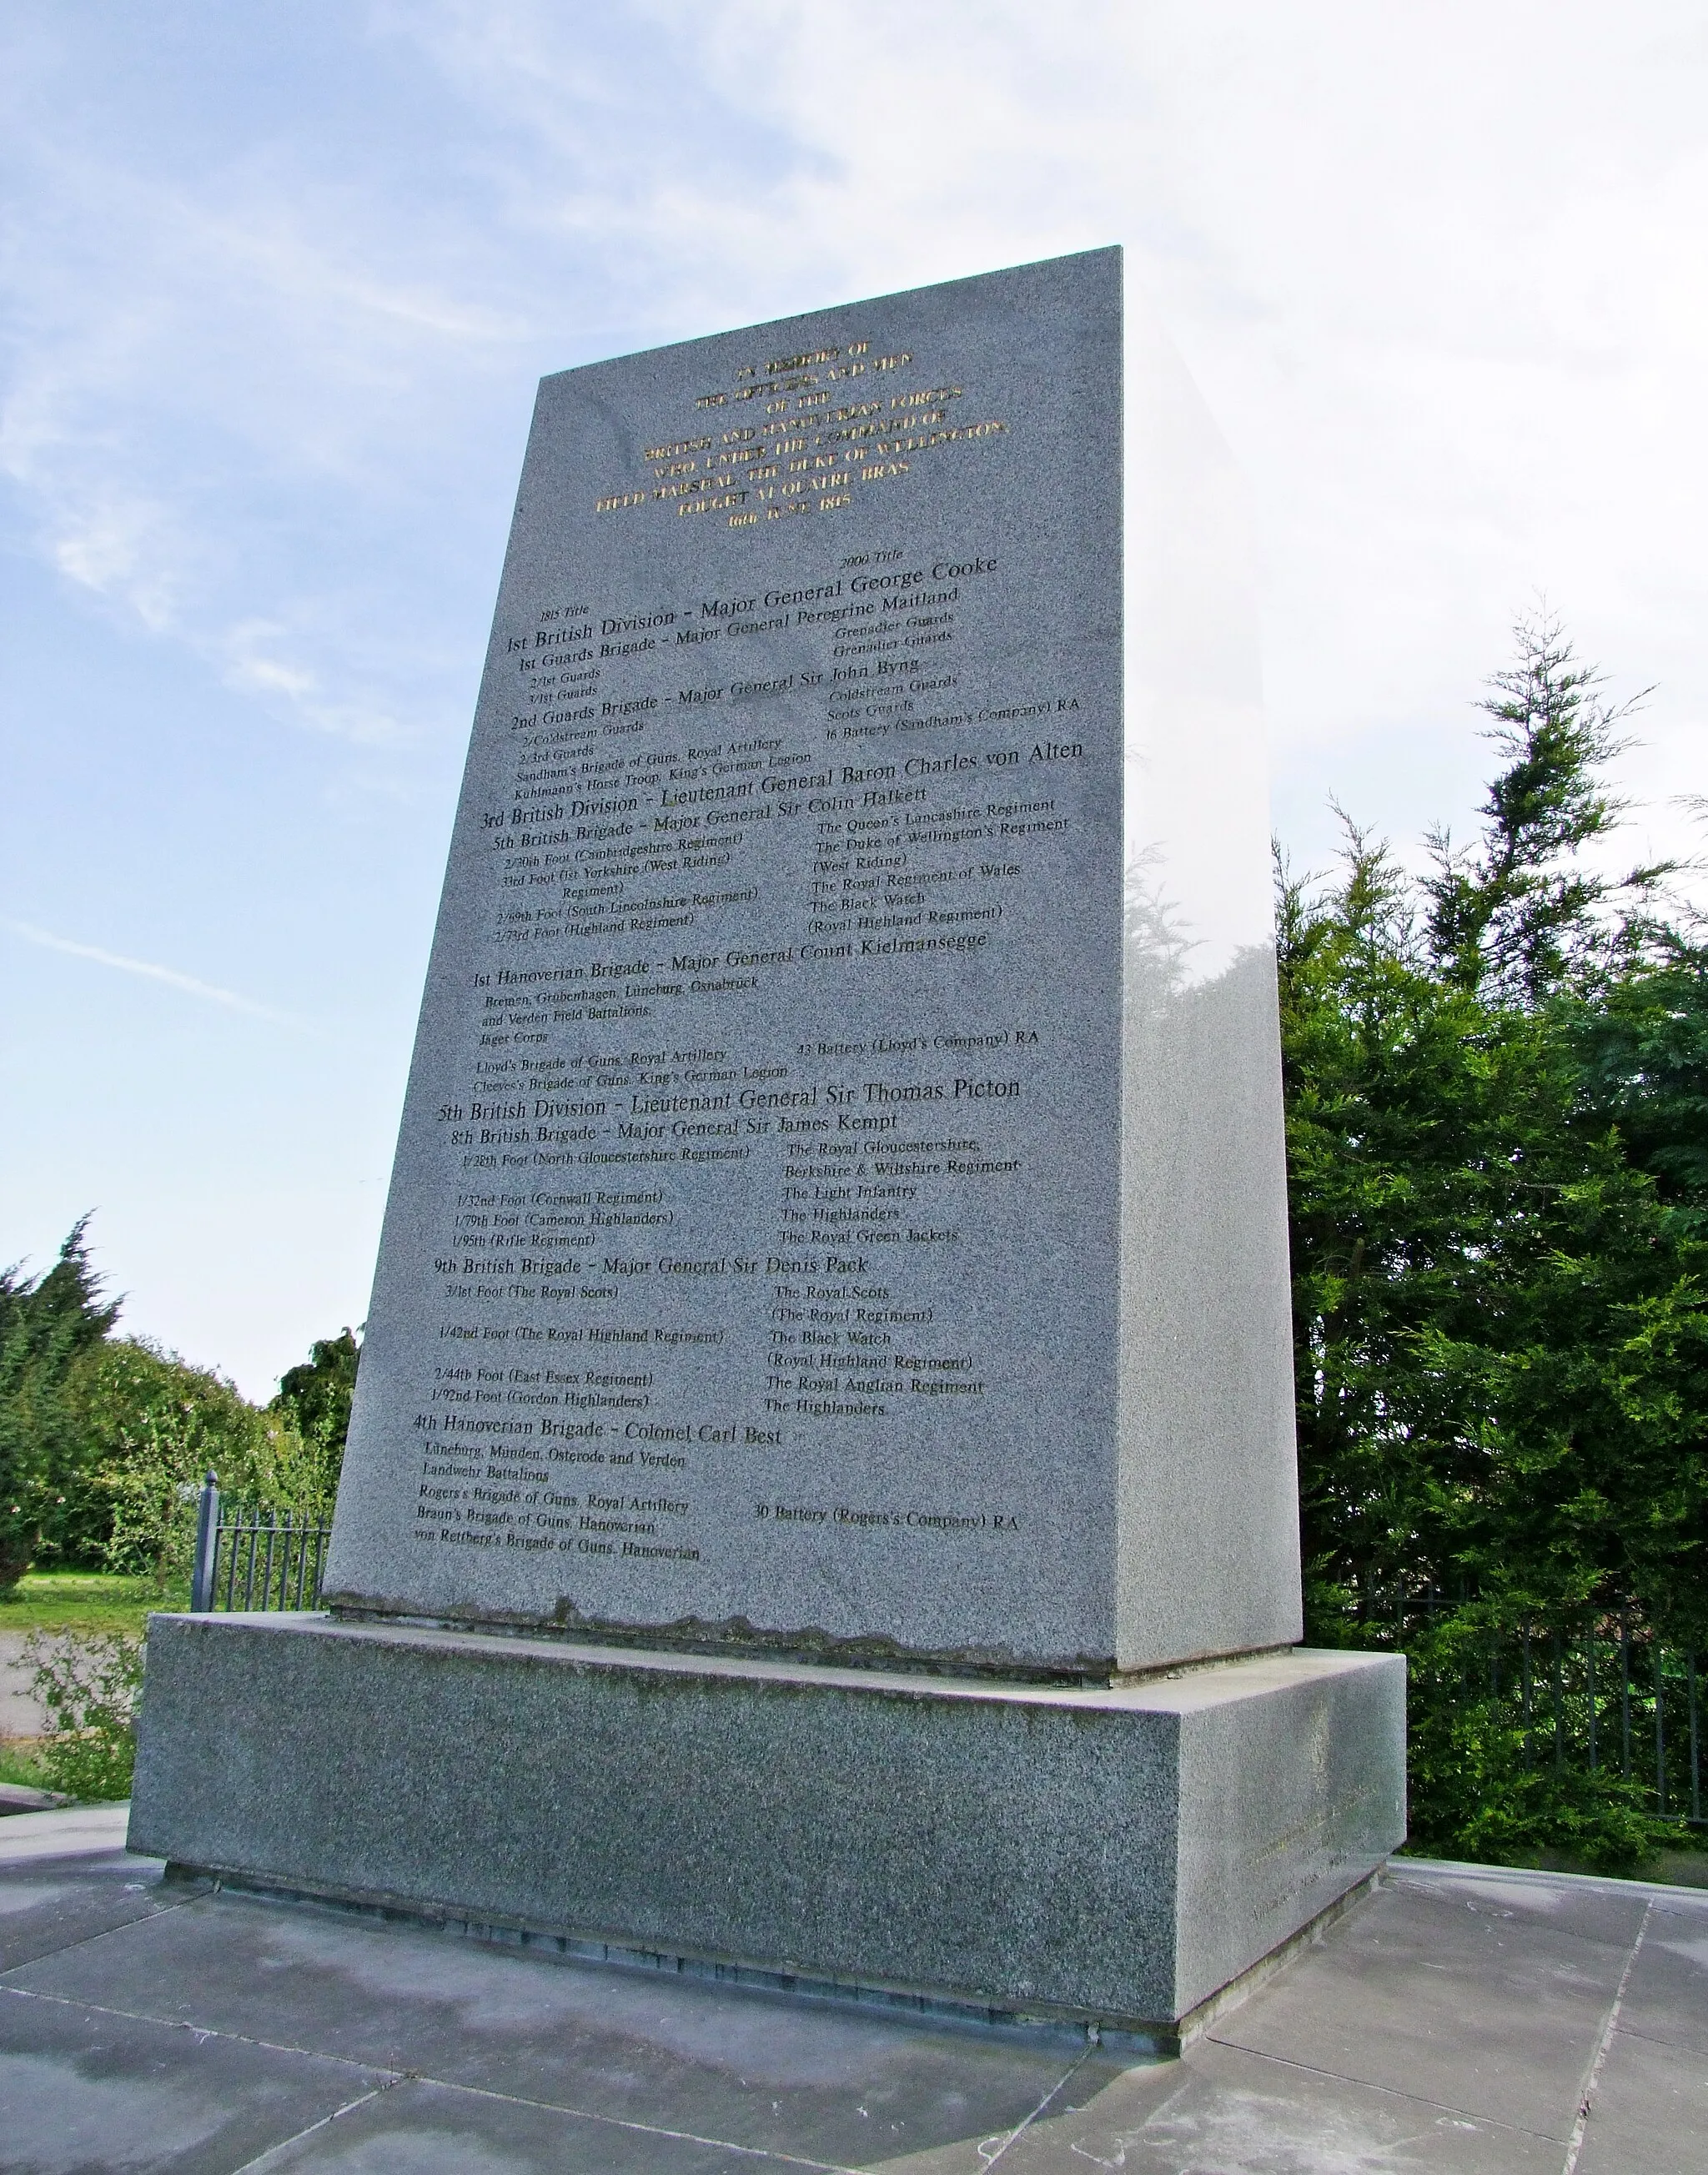 Photo showing: Monument to the British and Hanoverian (King's German Legion) troops who fought at Quatre-Bras on June 16th, 1815 – two days before the Victory of Waterloo.
Built at the initiative of and inaugurated by the 8th Duke of Wellington on June 7th, 2002.